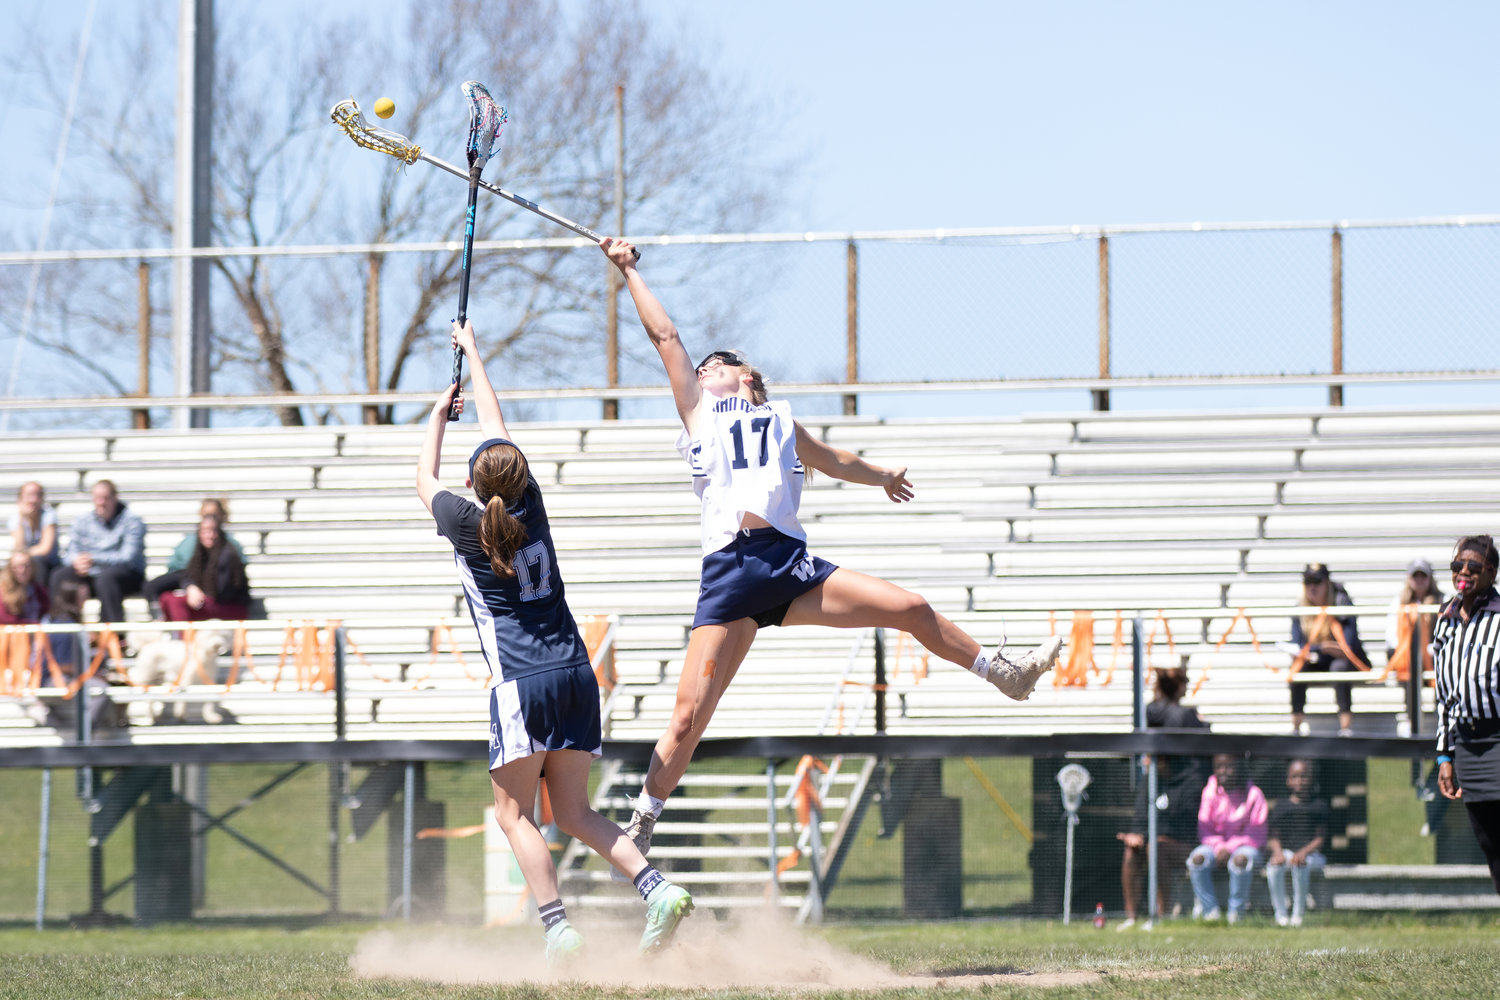 Bailey Lower soars above a Monomoy player on her way to grabbing a loose ball.